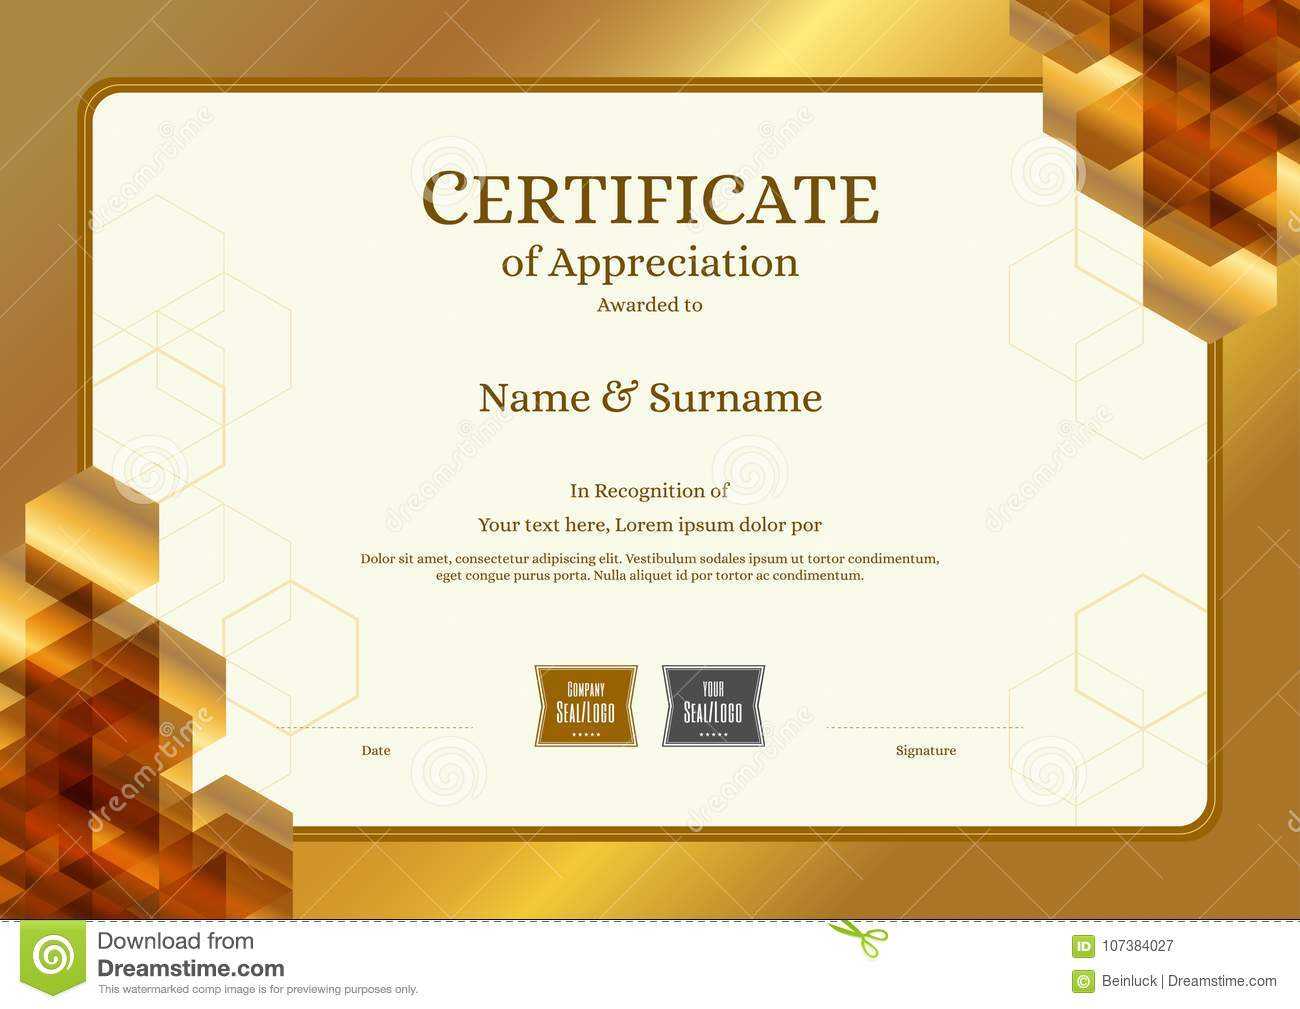 Luxury Certificate Template With Elegant Border Frame Intended For Elegant Certificate Templates Free